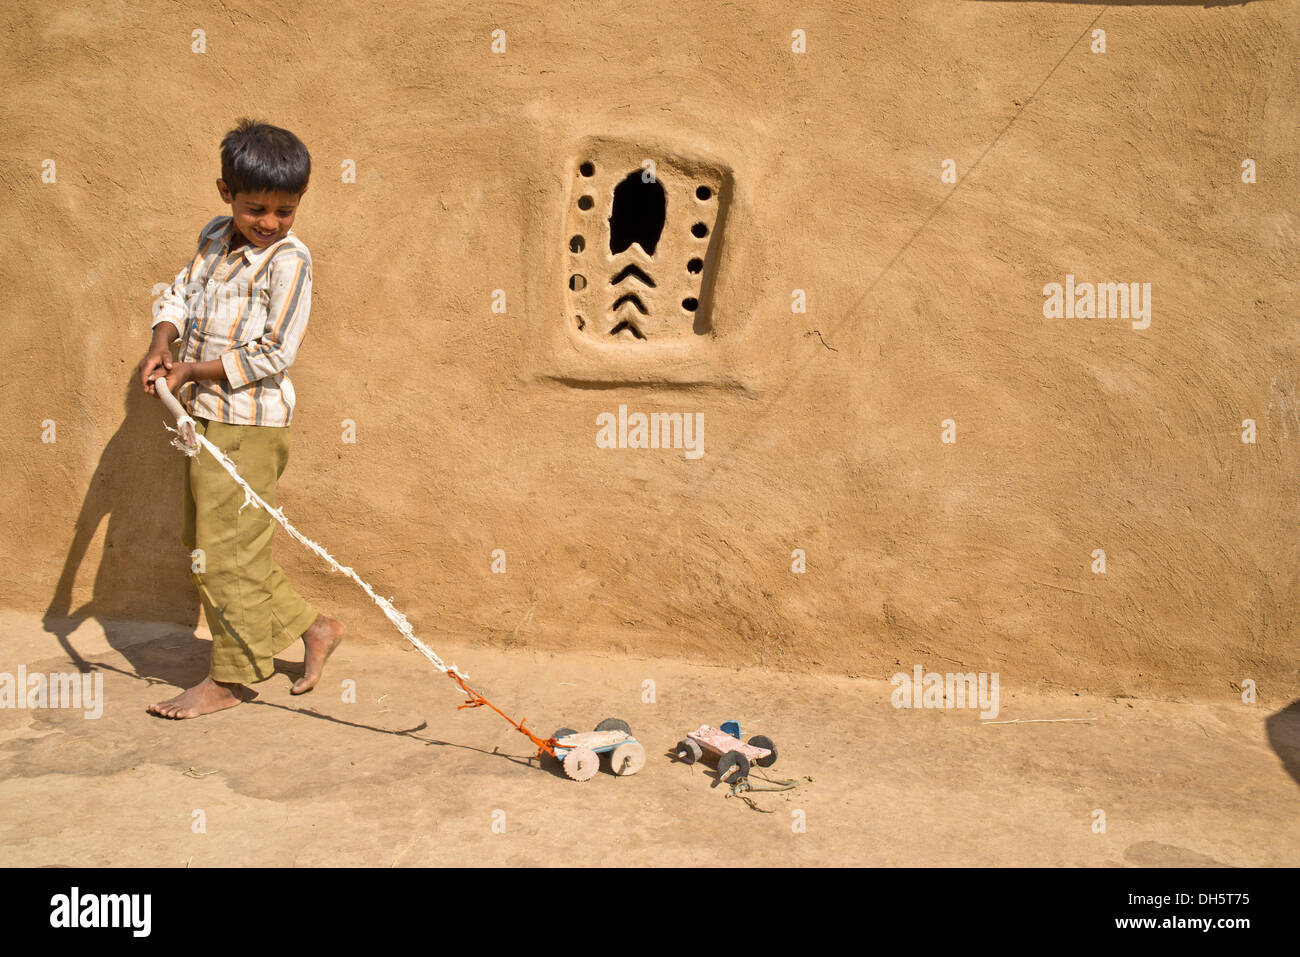 Boy playing with a home-made toy cars outside a mud house, Wüste Thar, Rajasthan, India Stock Photo